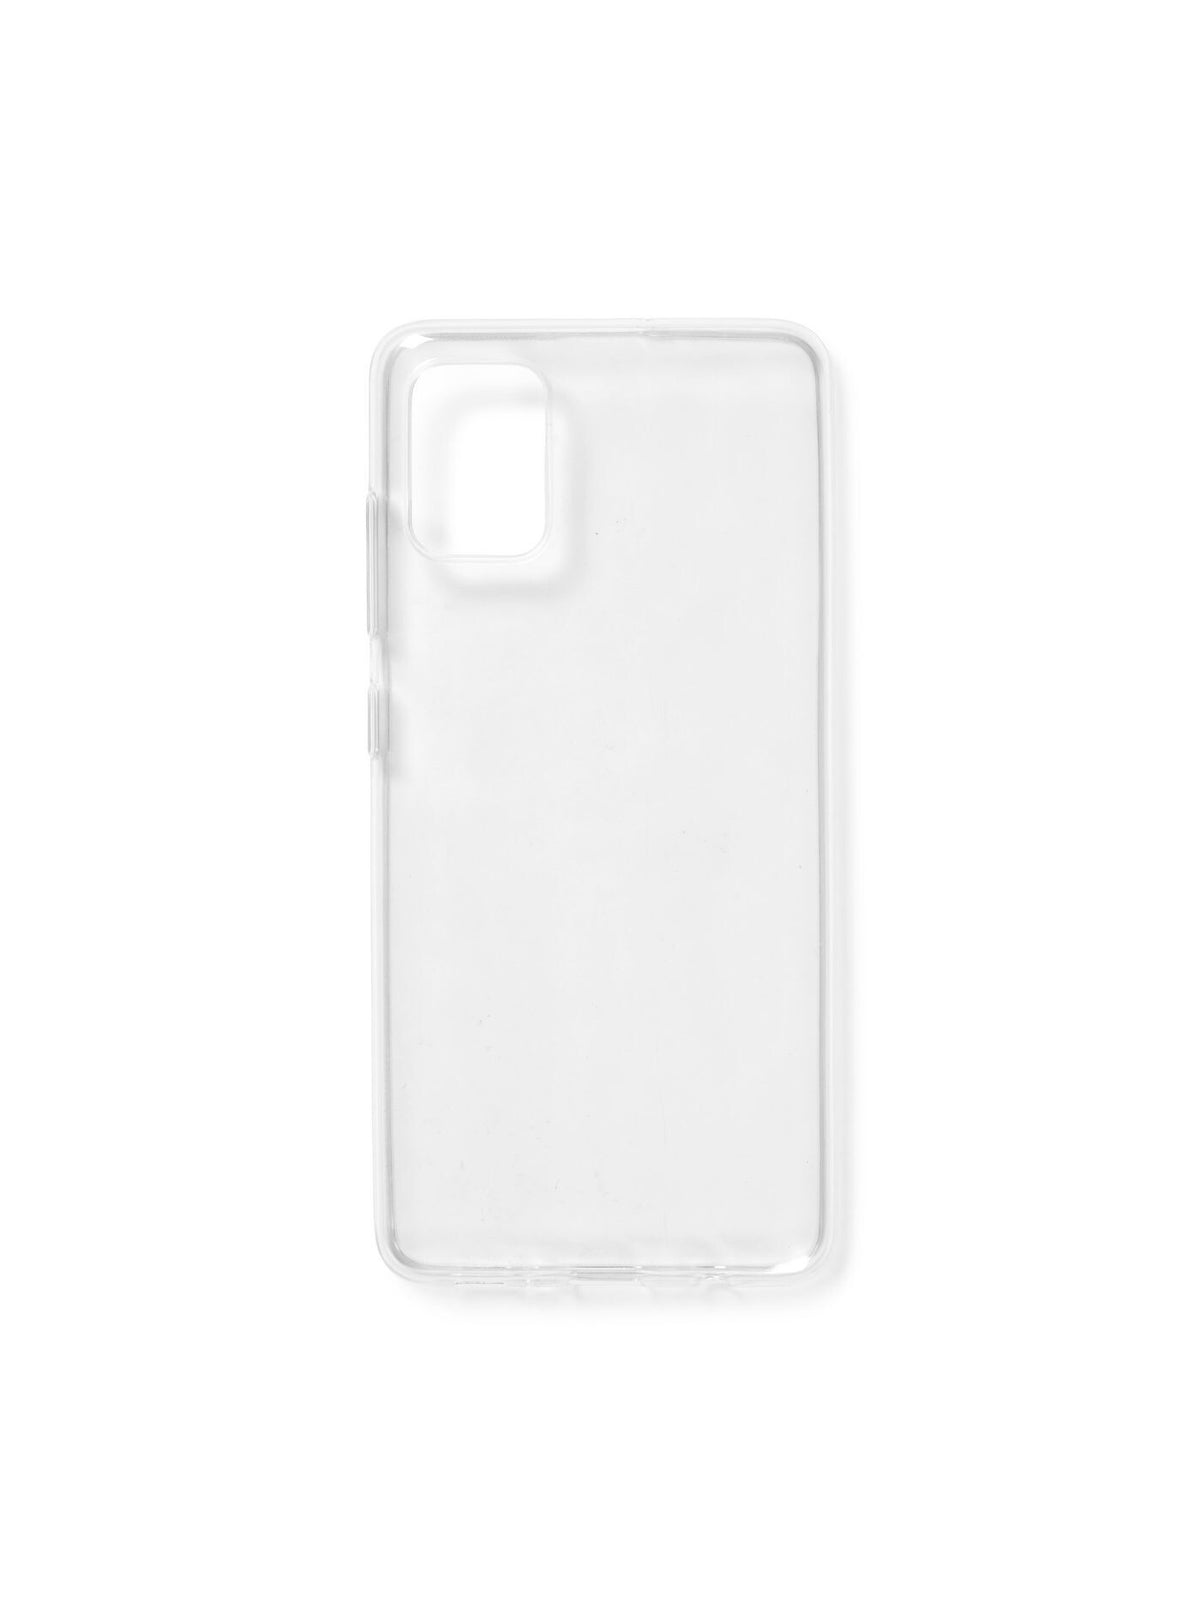 eSTUFF LONDON mobile phone case for Galaxy A51 in Transparent